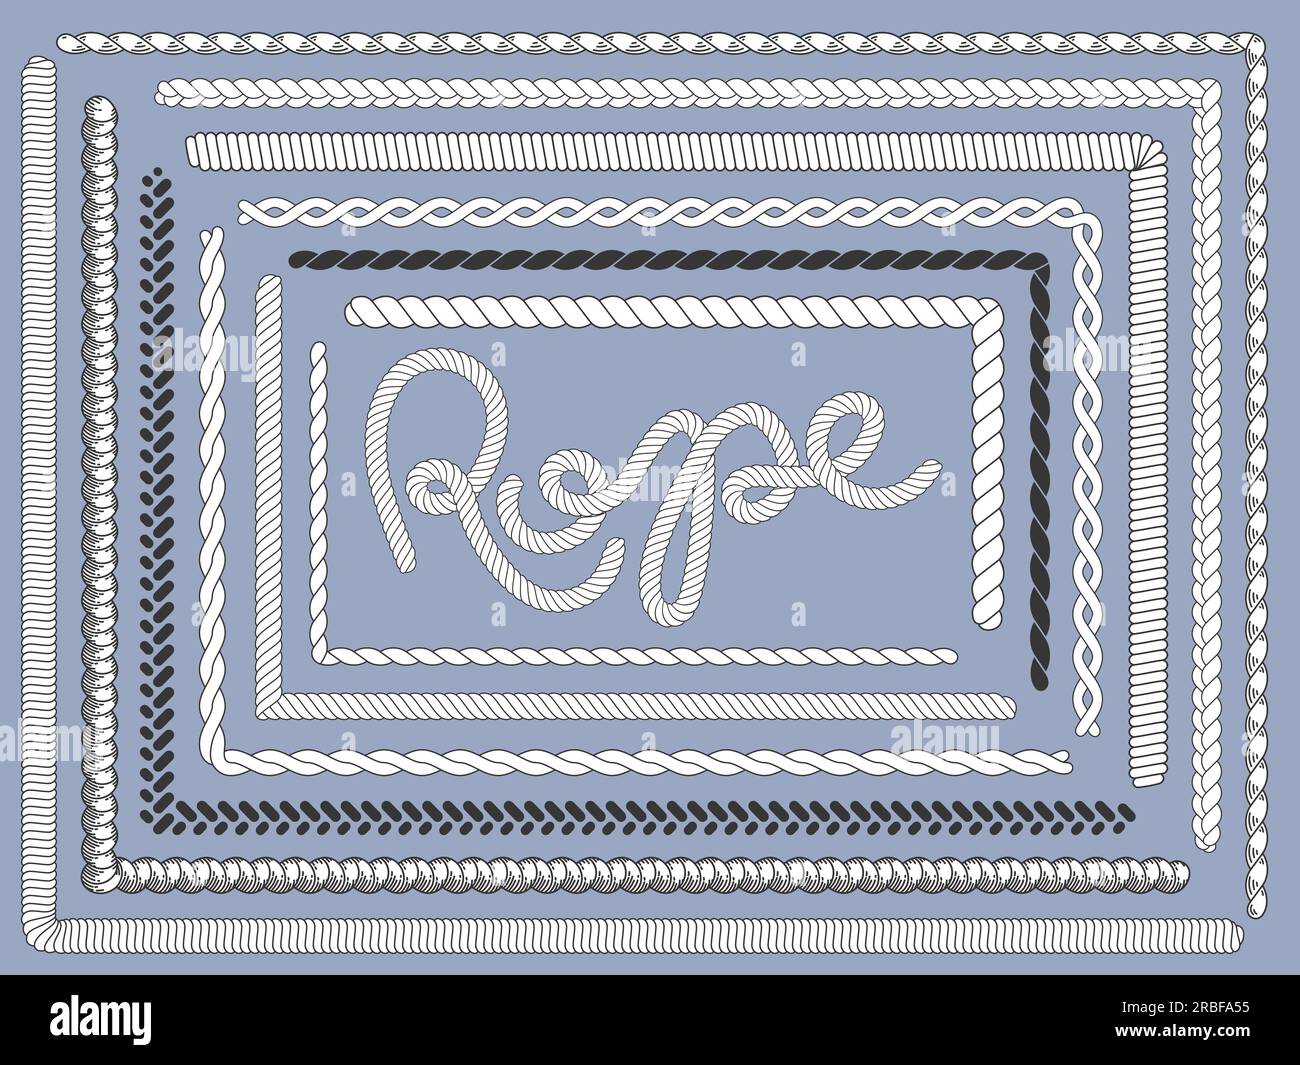 Twisted Ropes Nodes Sailor Knots Decorative Stock Vector (Royalty